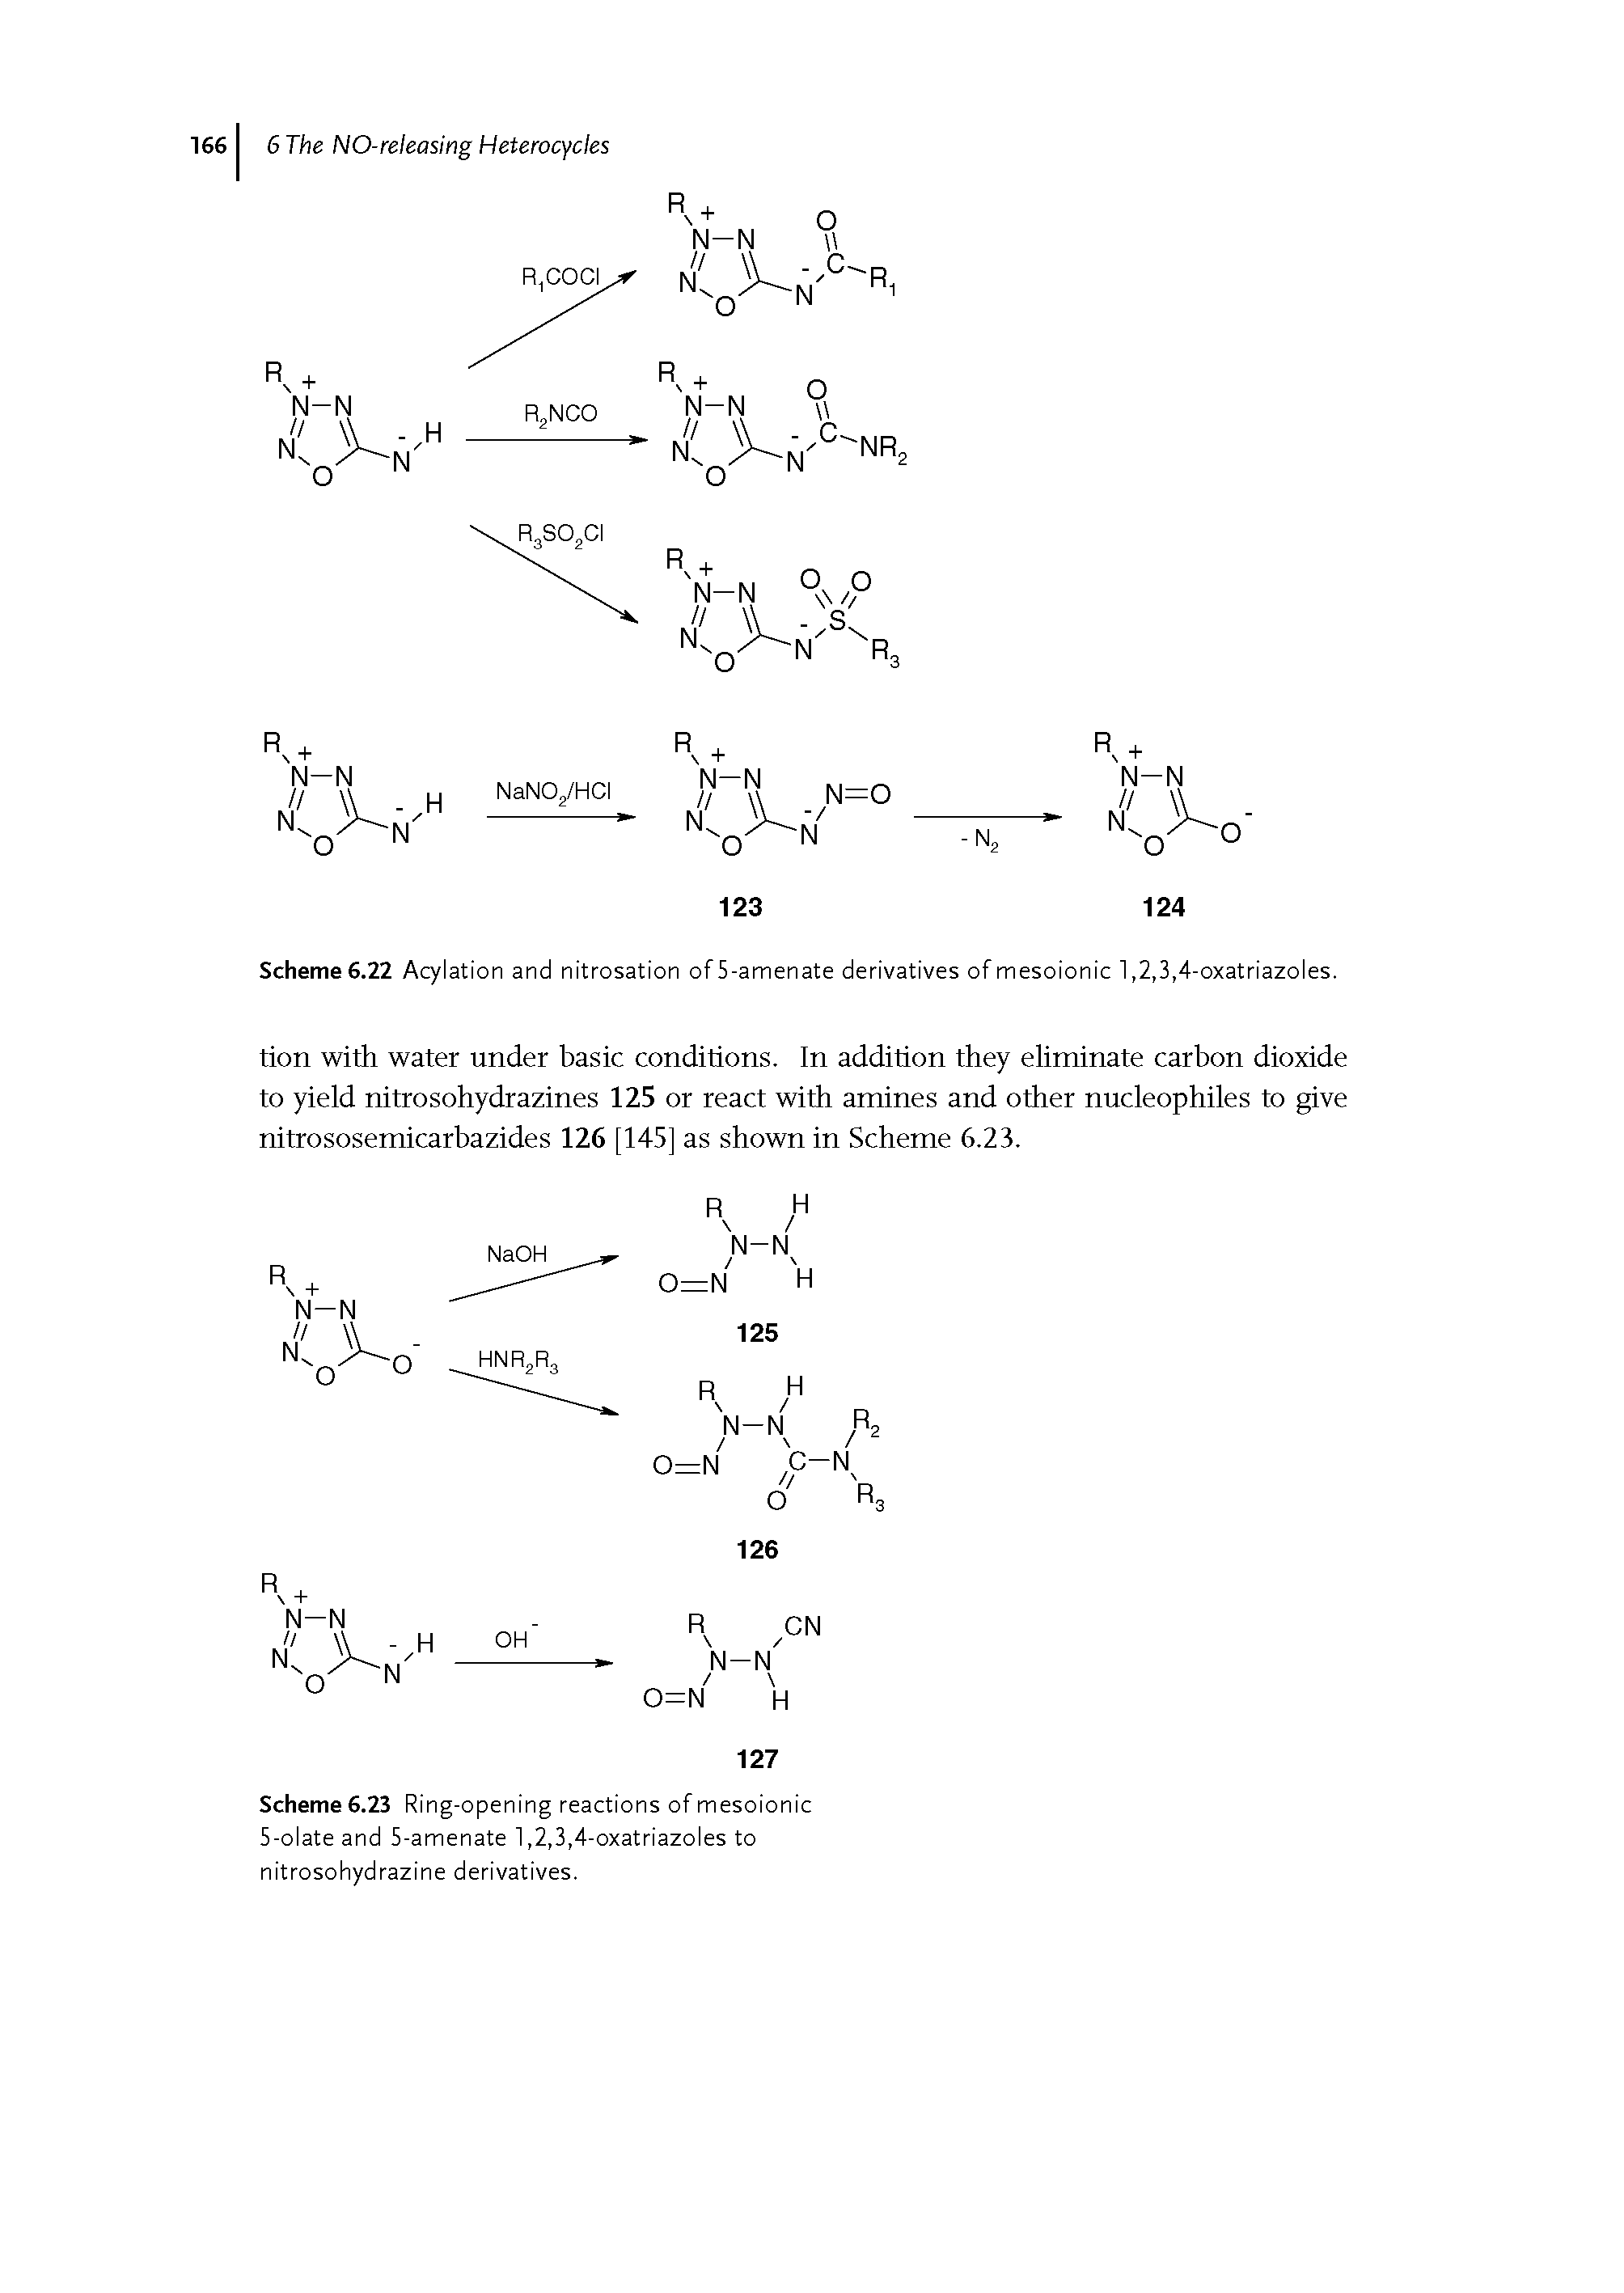 Scheme 6.23 Ring-opening reactions of mesoionic 5-olate and 5-amenate 1,2,3,4-oxatriazoles to nitrosohydrazine derivatives.